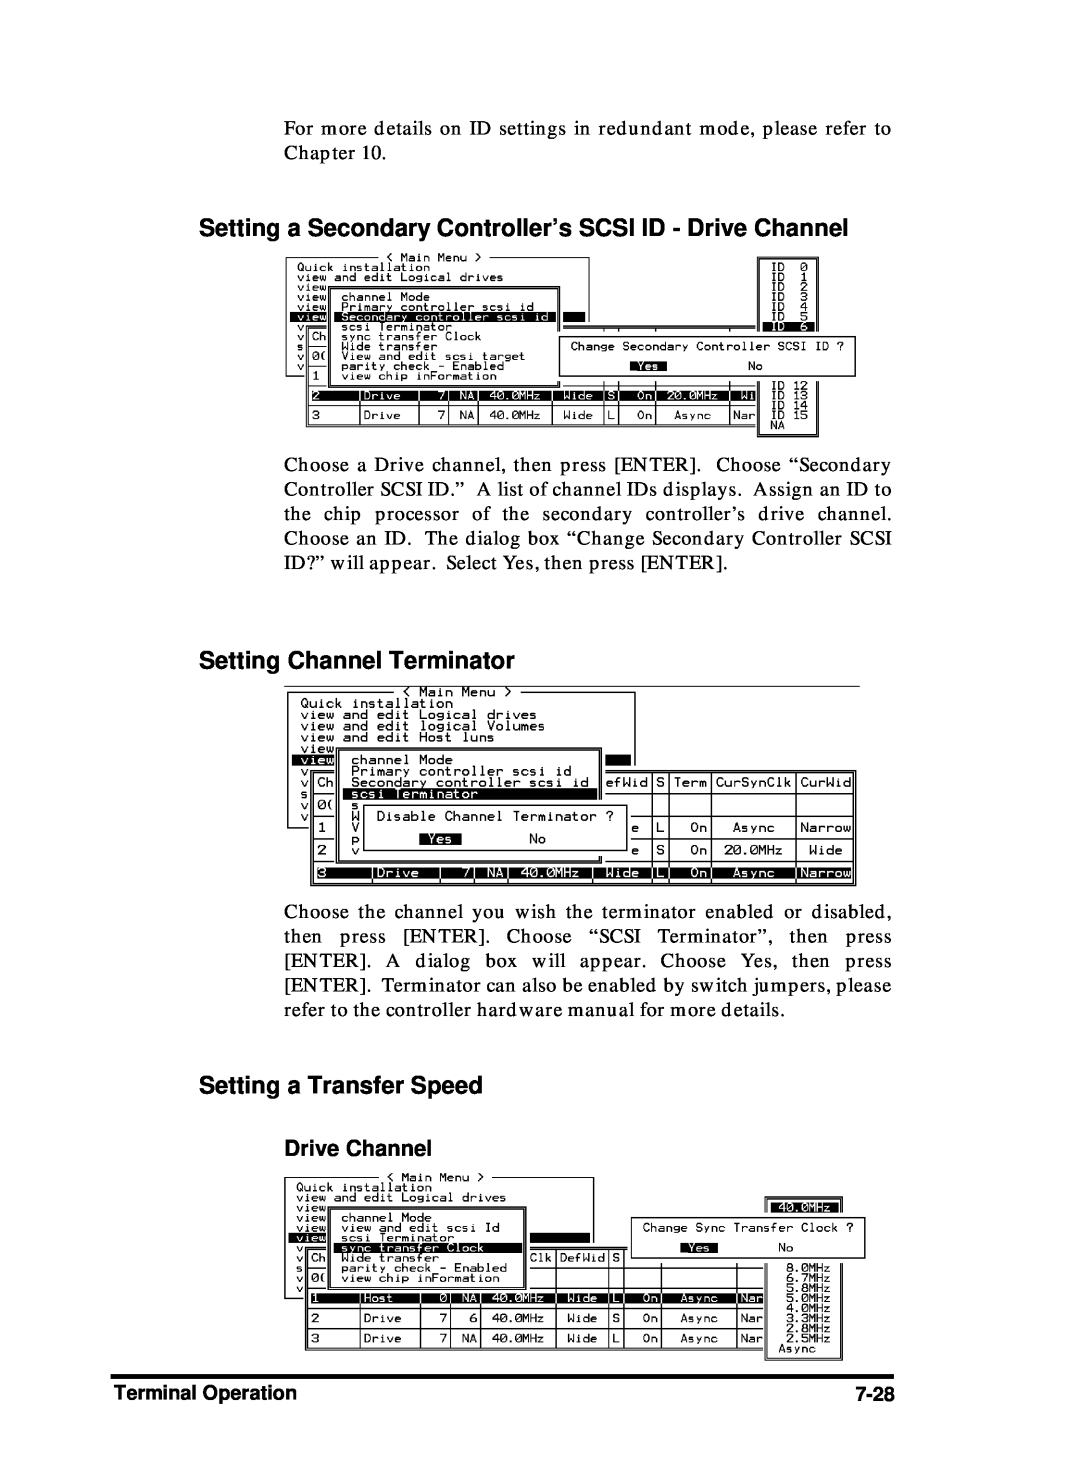 Compaq Infortrend manual Setting a Secondary Controller’s SCSI ID - Drive Channel, Setting Channel Terminator 